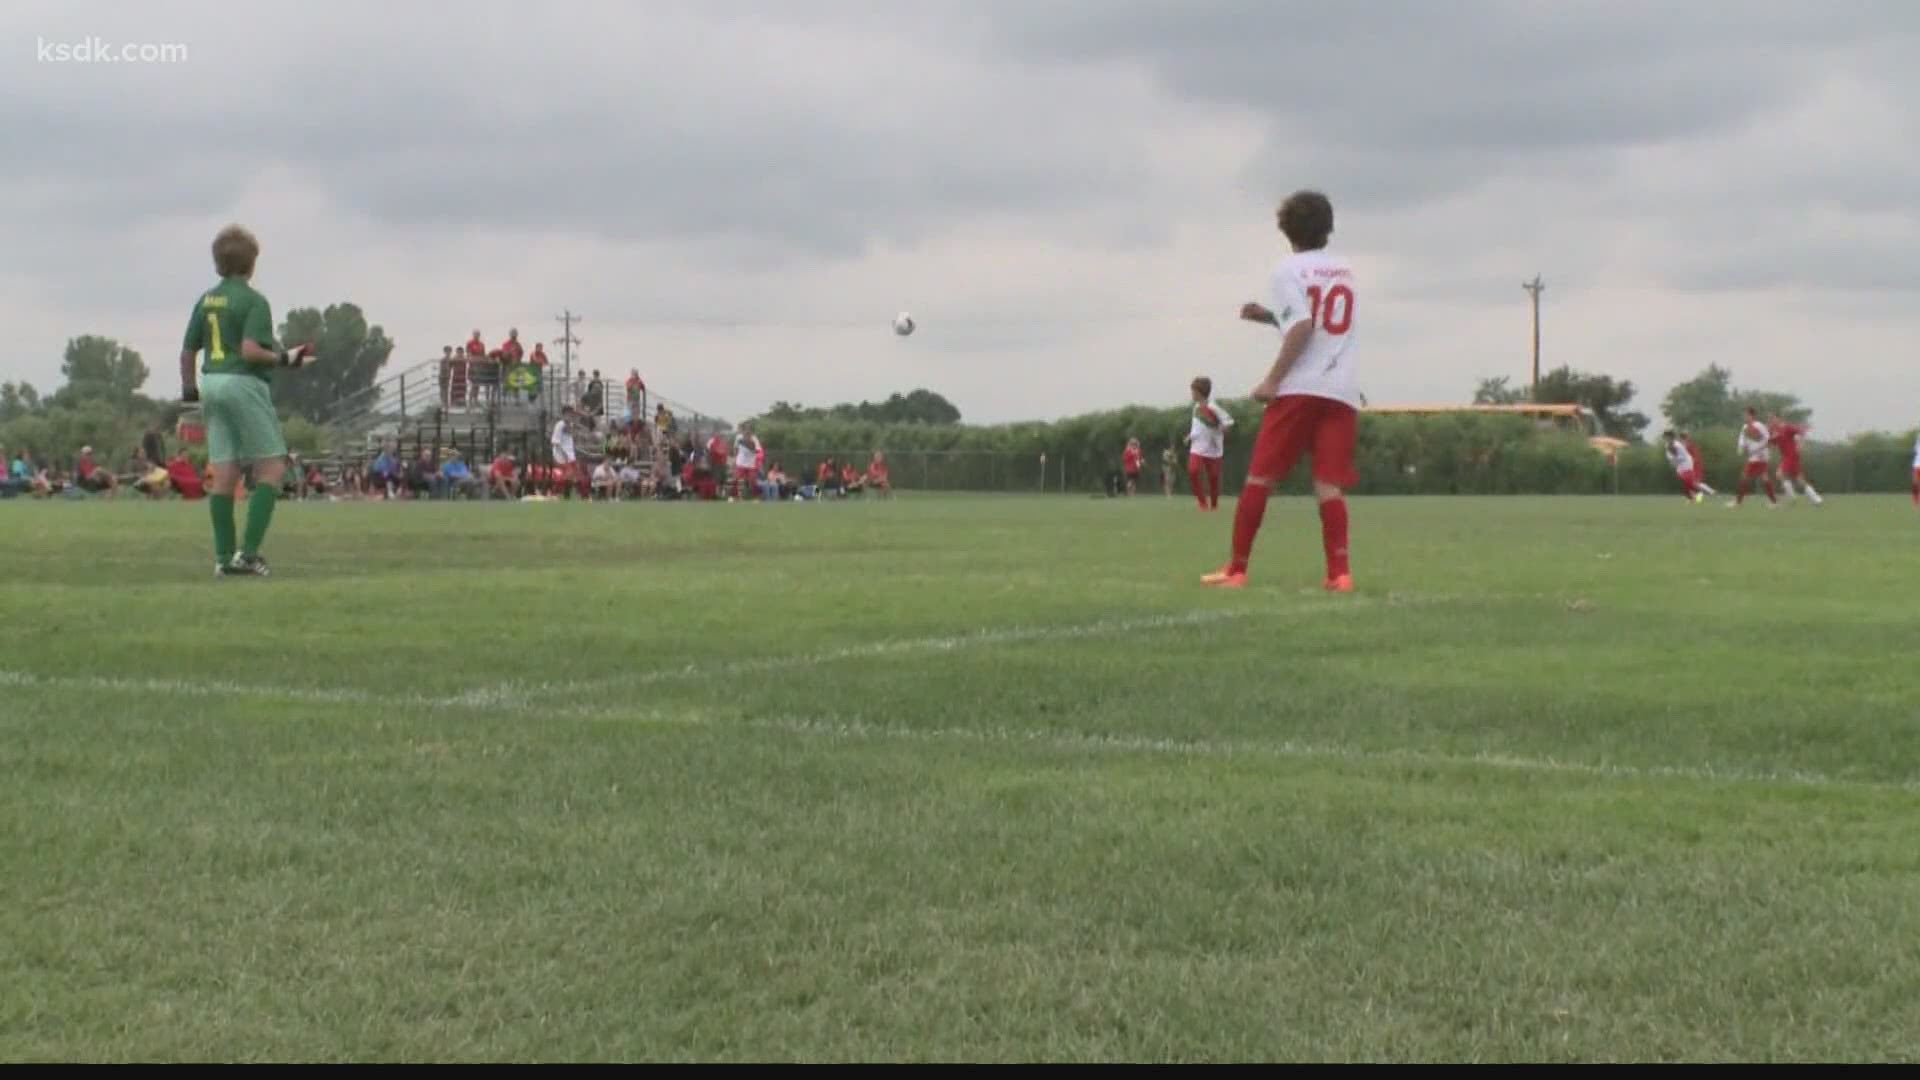 Youth sports teams in St. Louis County prepare for play under new guidelines | www.strongerinc.org